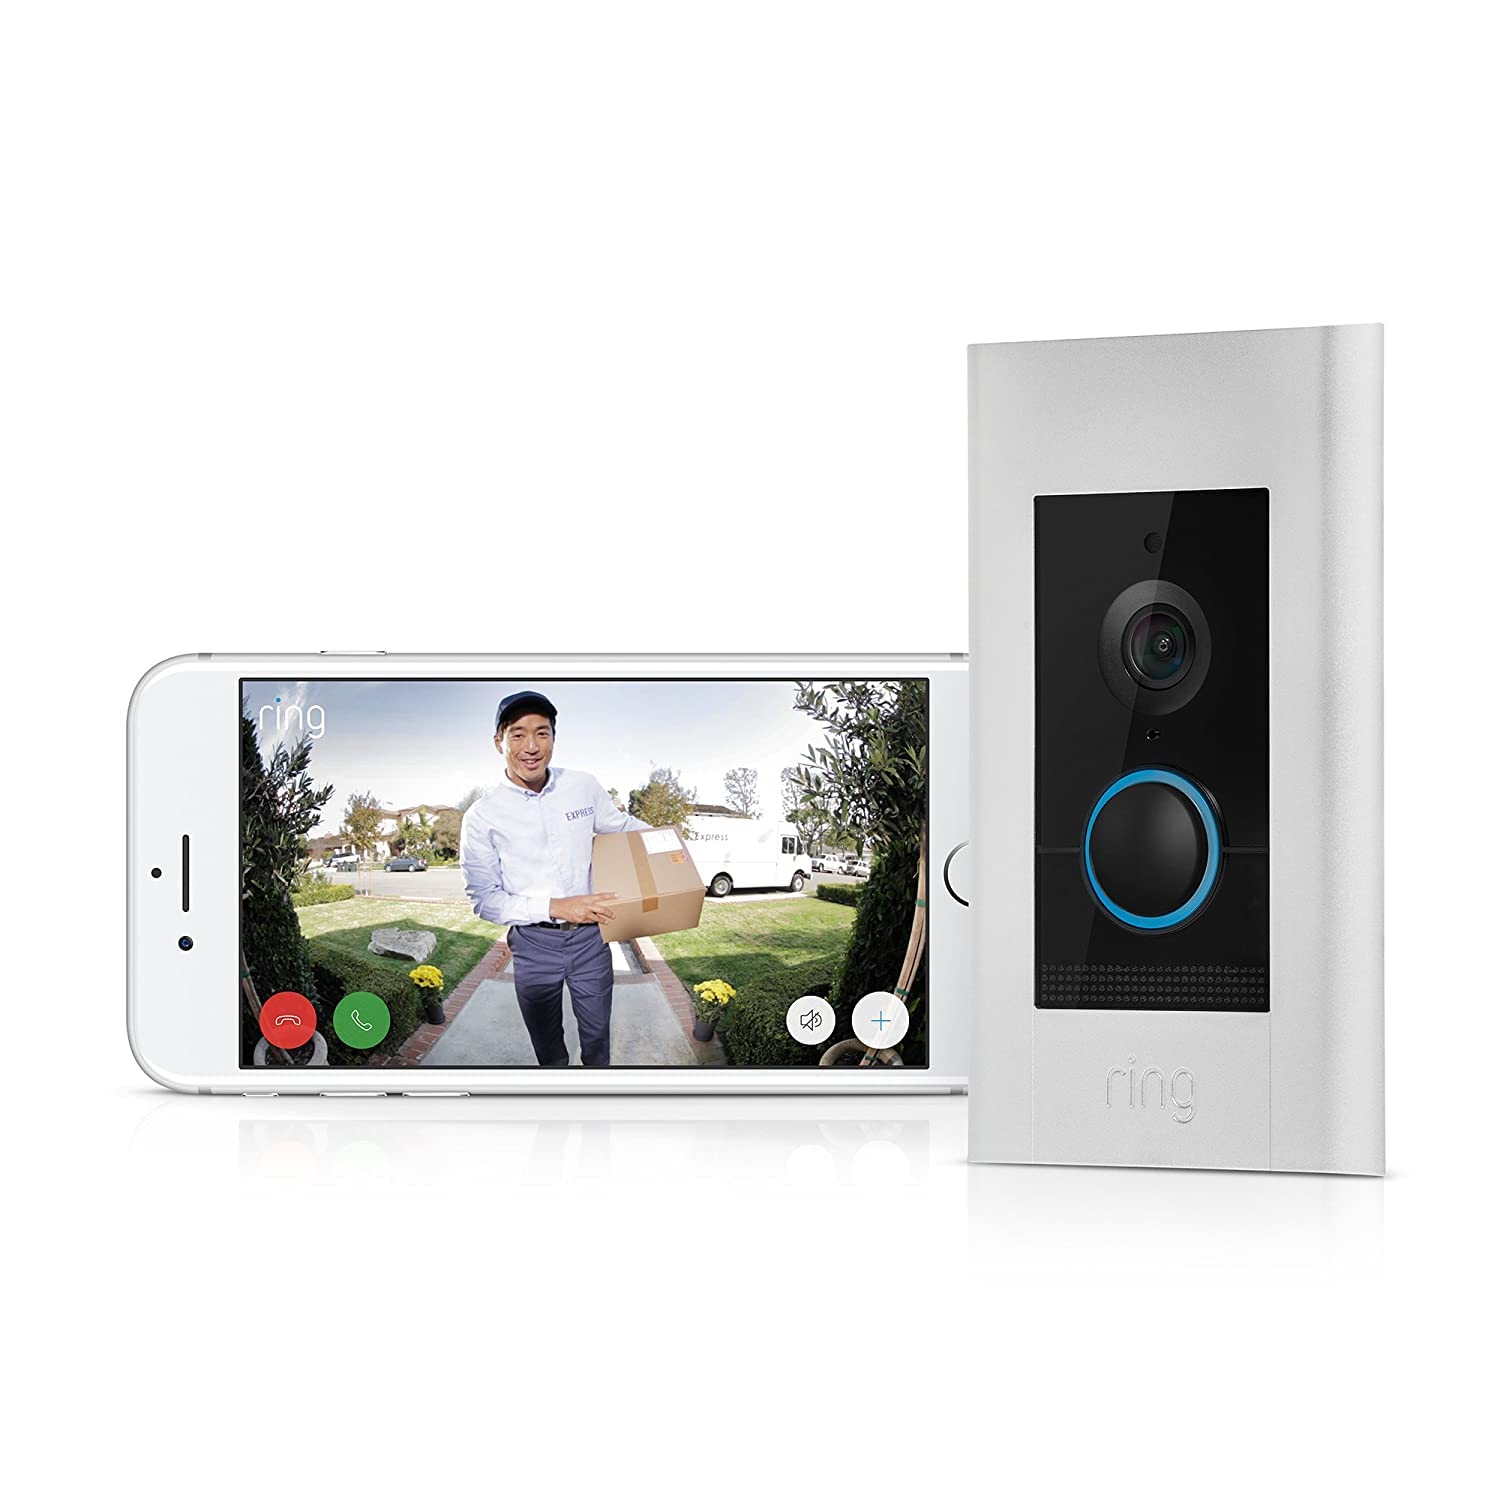 Ring Video Doorbell Elite with Ring PoE Adapter (2nd Gen) - White